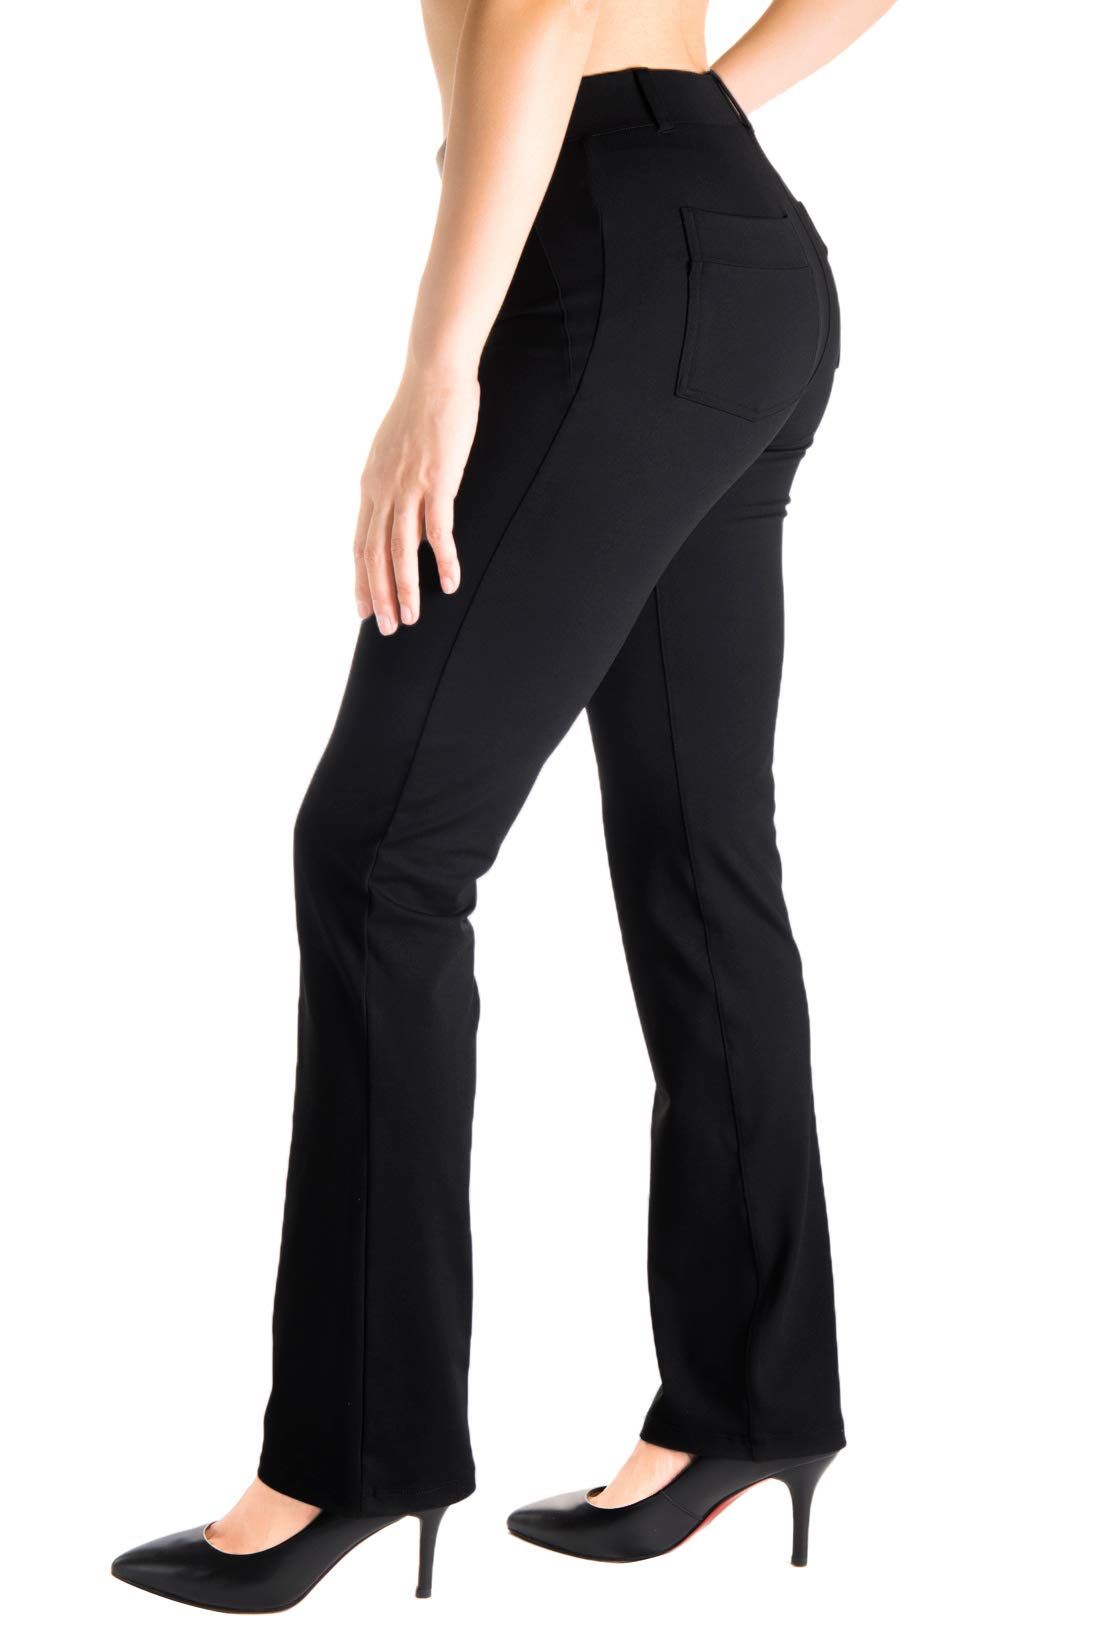 The Best Yoga Dress Pants for the Office  Shop Girl Daily